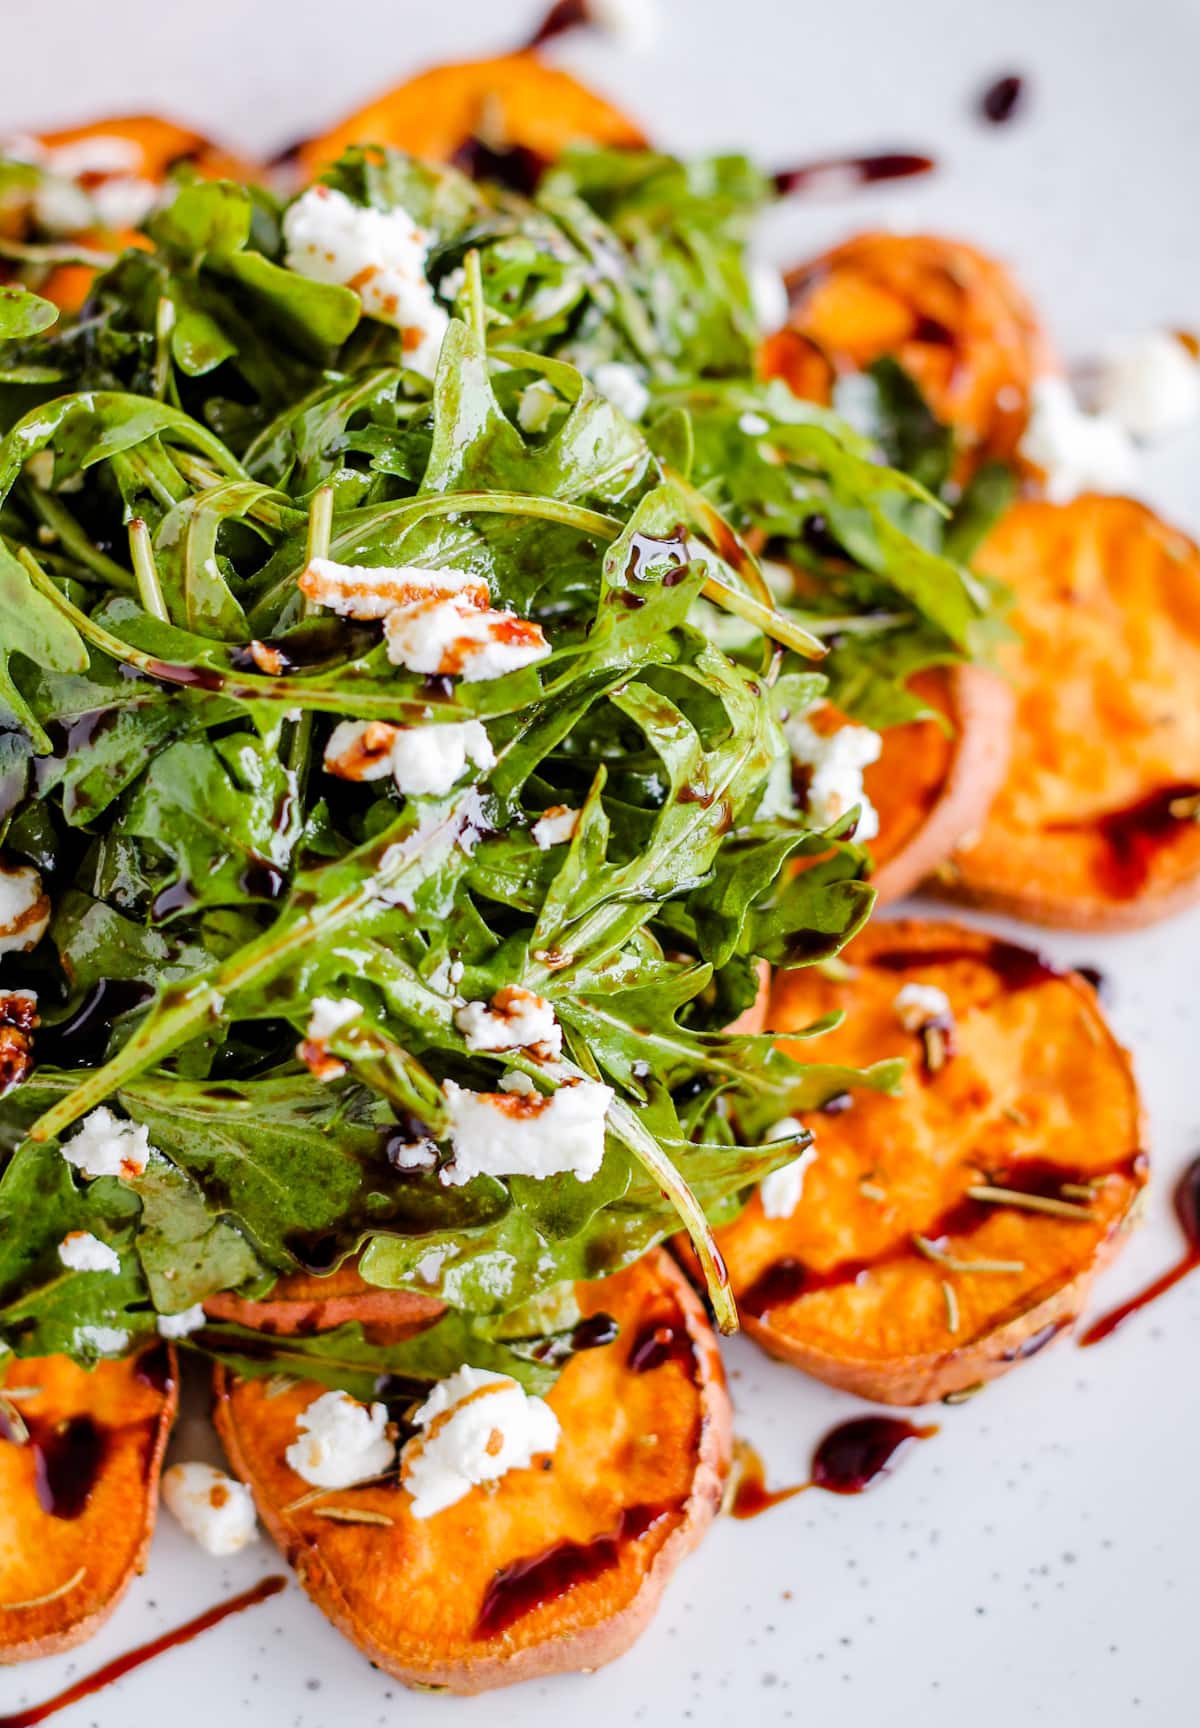 arugula salad with sweet potatoes and balsamic drizzle.